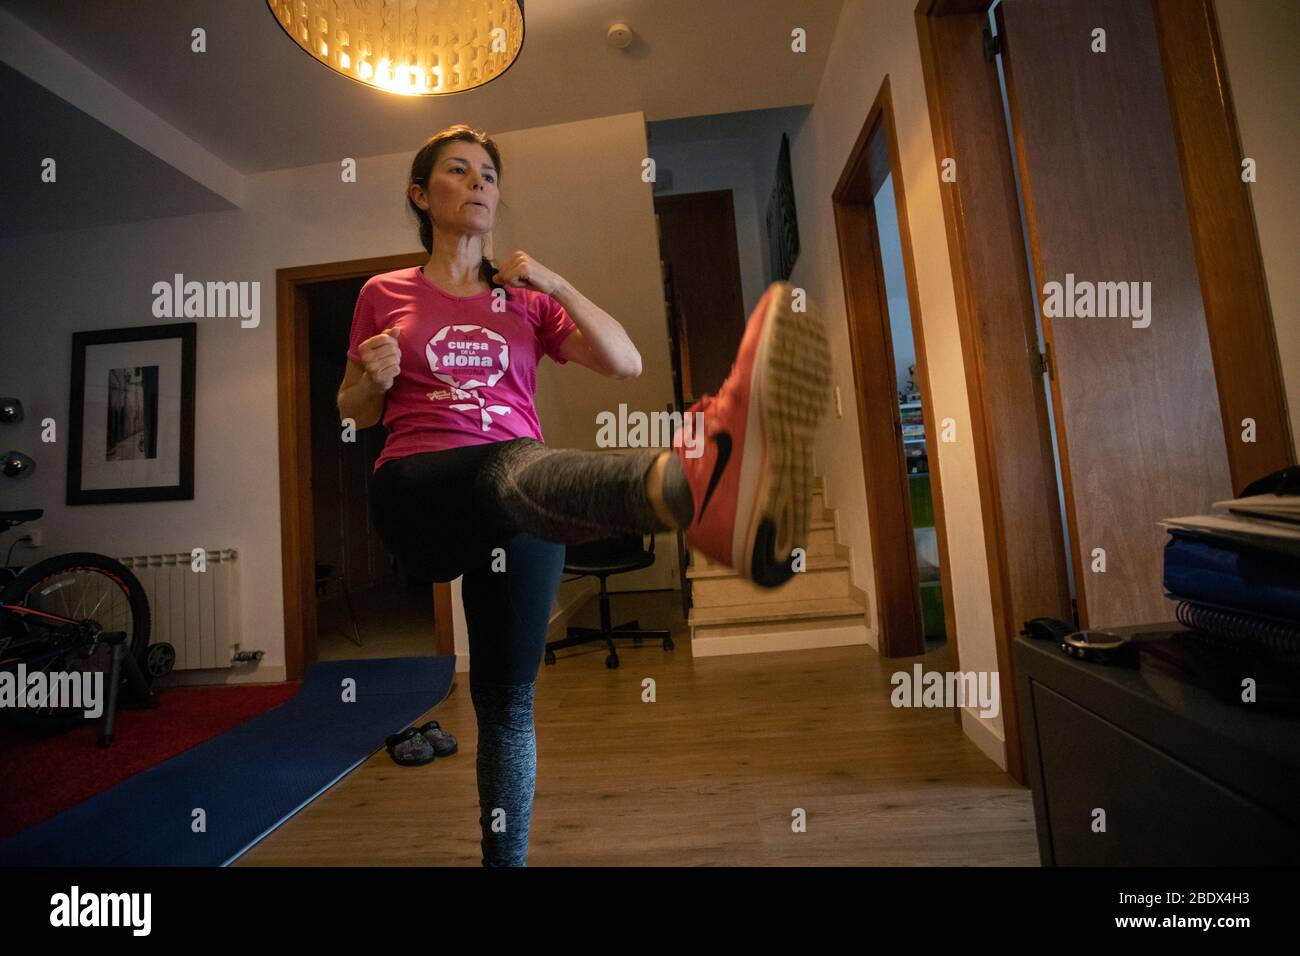 Woman doing exercise in a Spanish home during Covid19 confinement in Girona, Catalonia, Spain Stock Photo